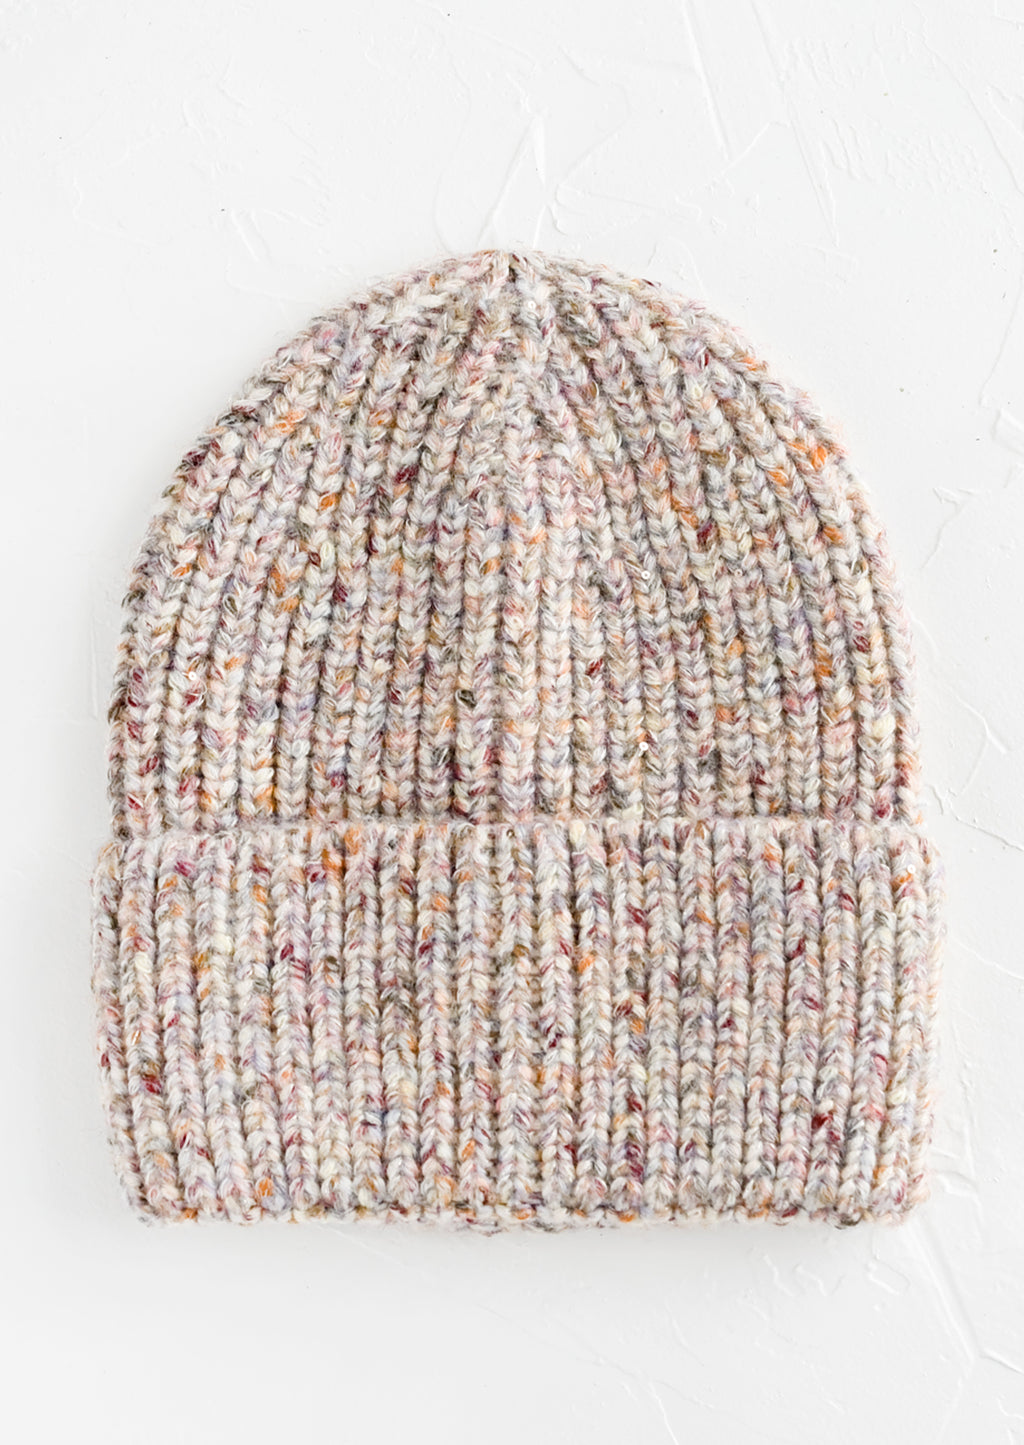 Ivory Multi: A knit beanie hat with cuffed rim made in multicolor speckled ivory yarn.